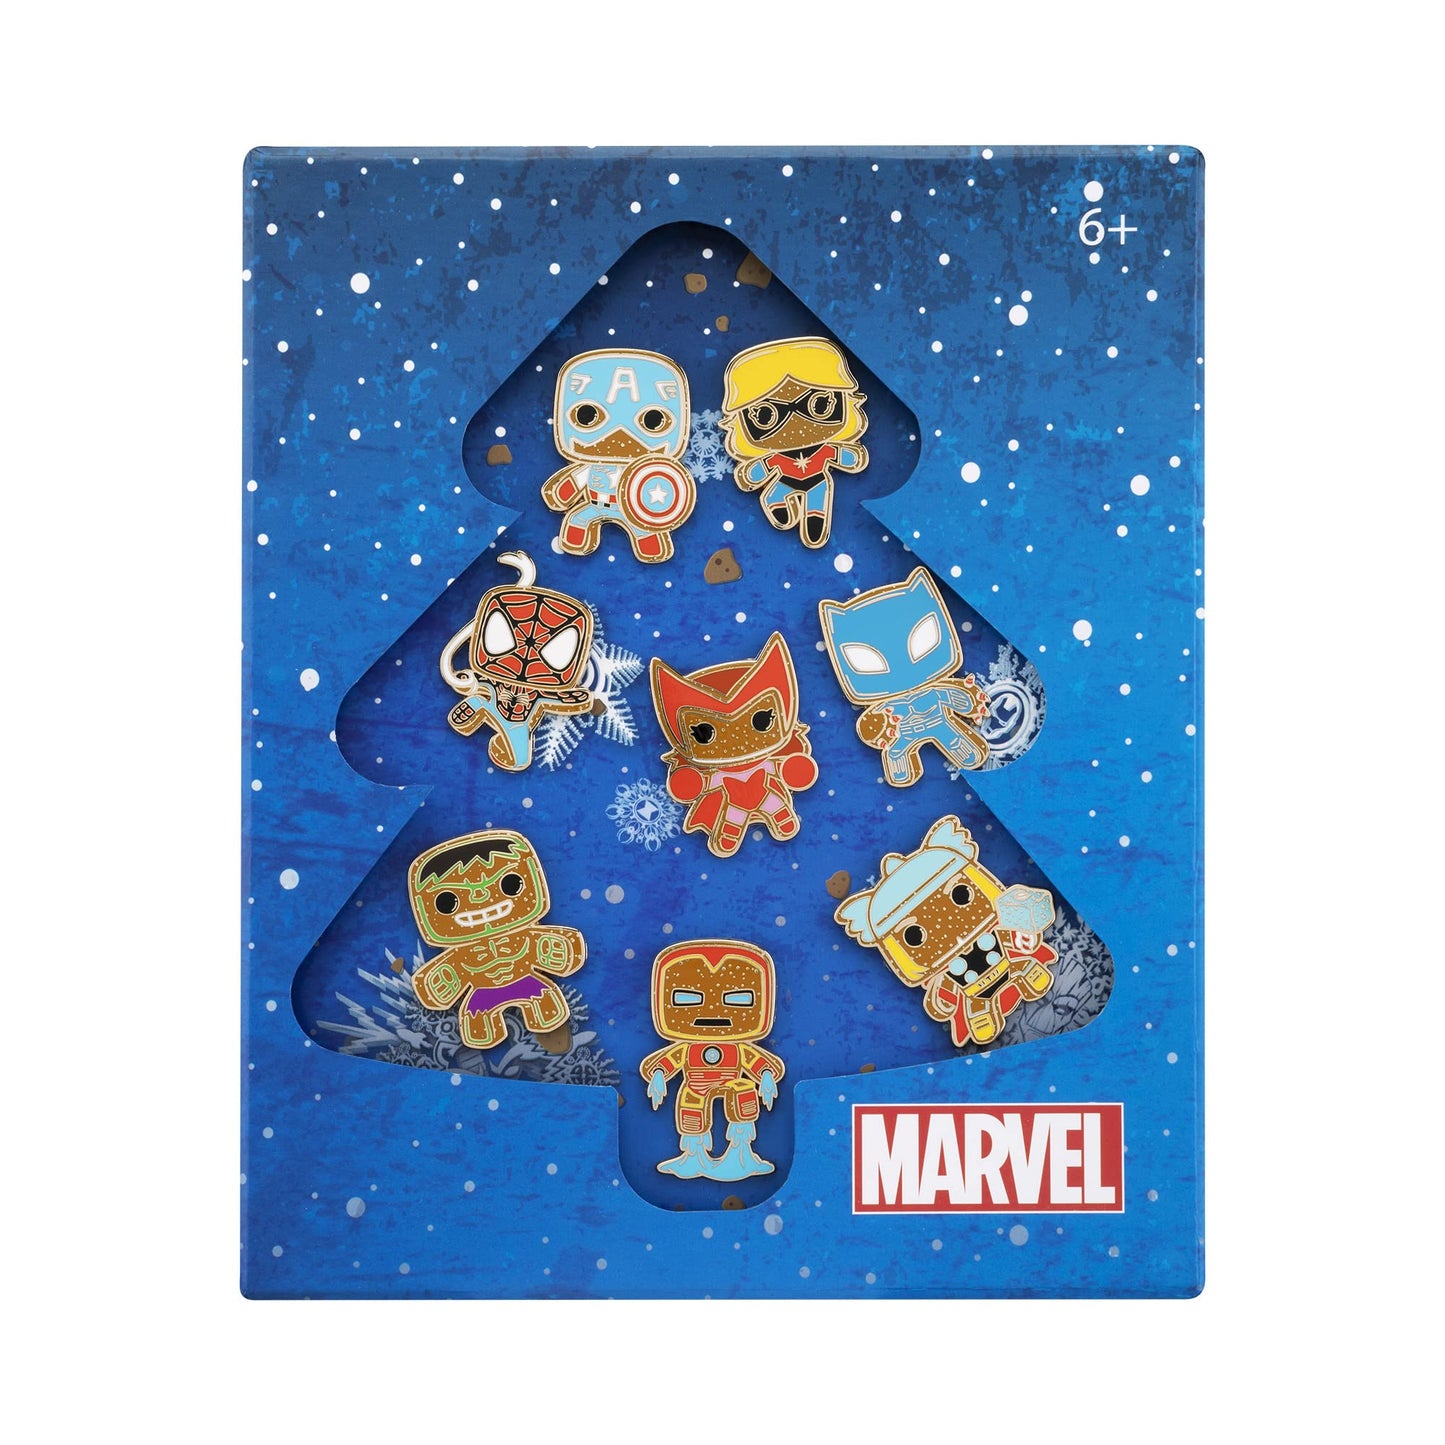 Funko POP! Pin Marvel Gingerbread - Avengers 8 Piece Pin Set Exclusive